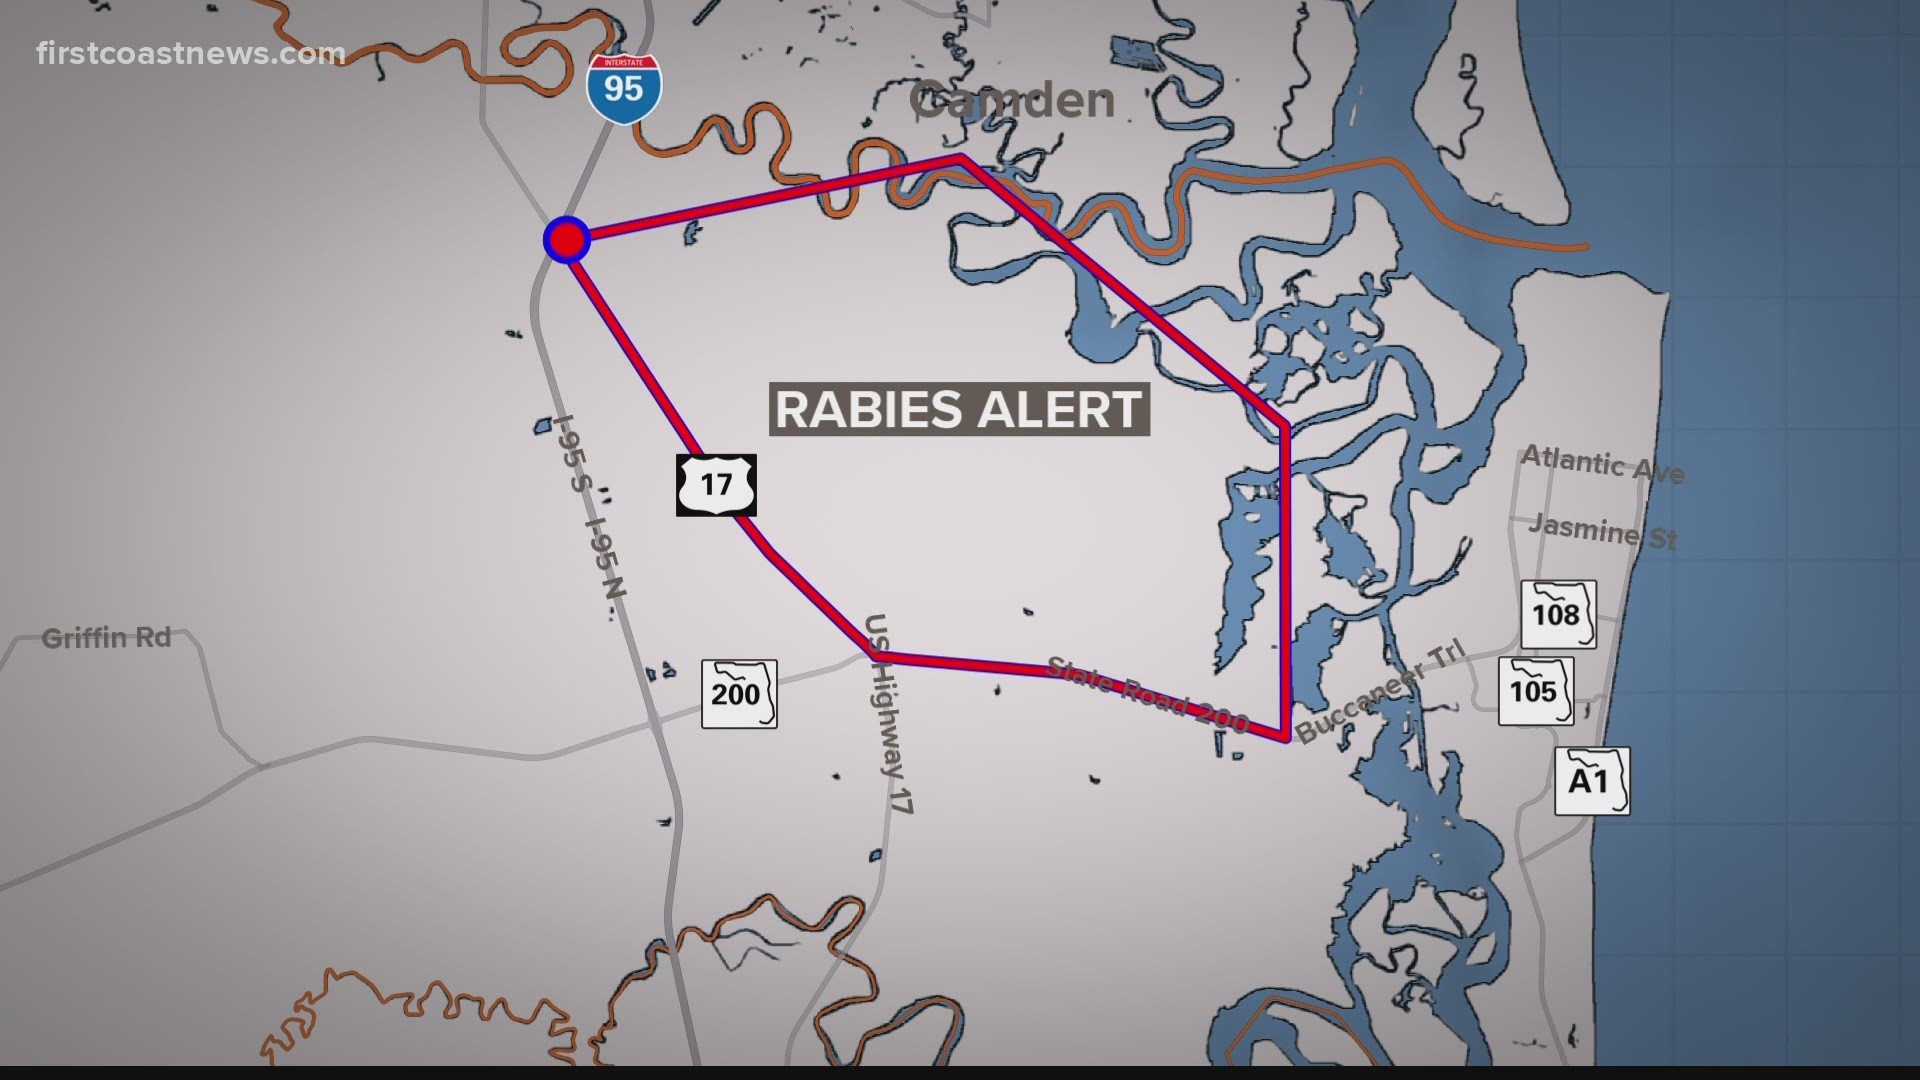 Rabies alert issued in Nassau County after fox tests positive